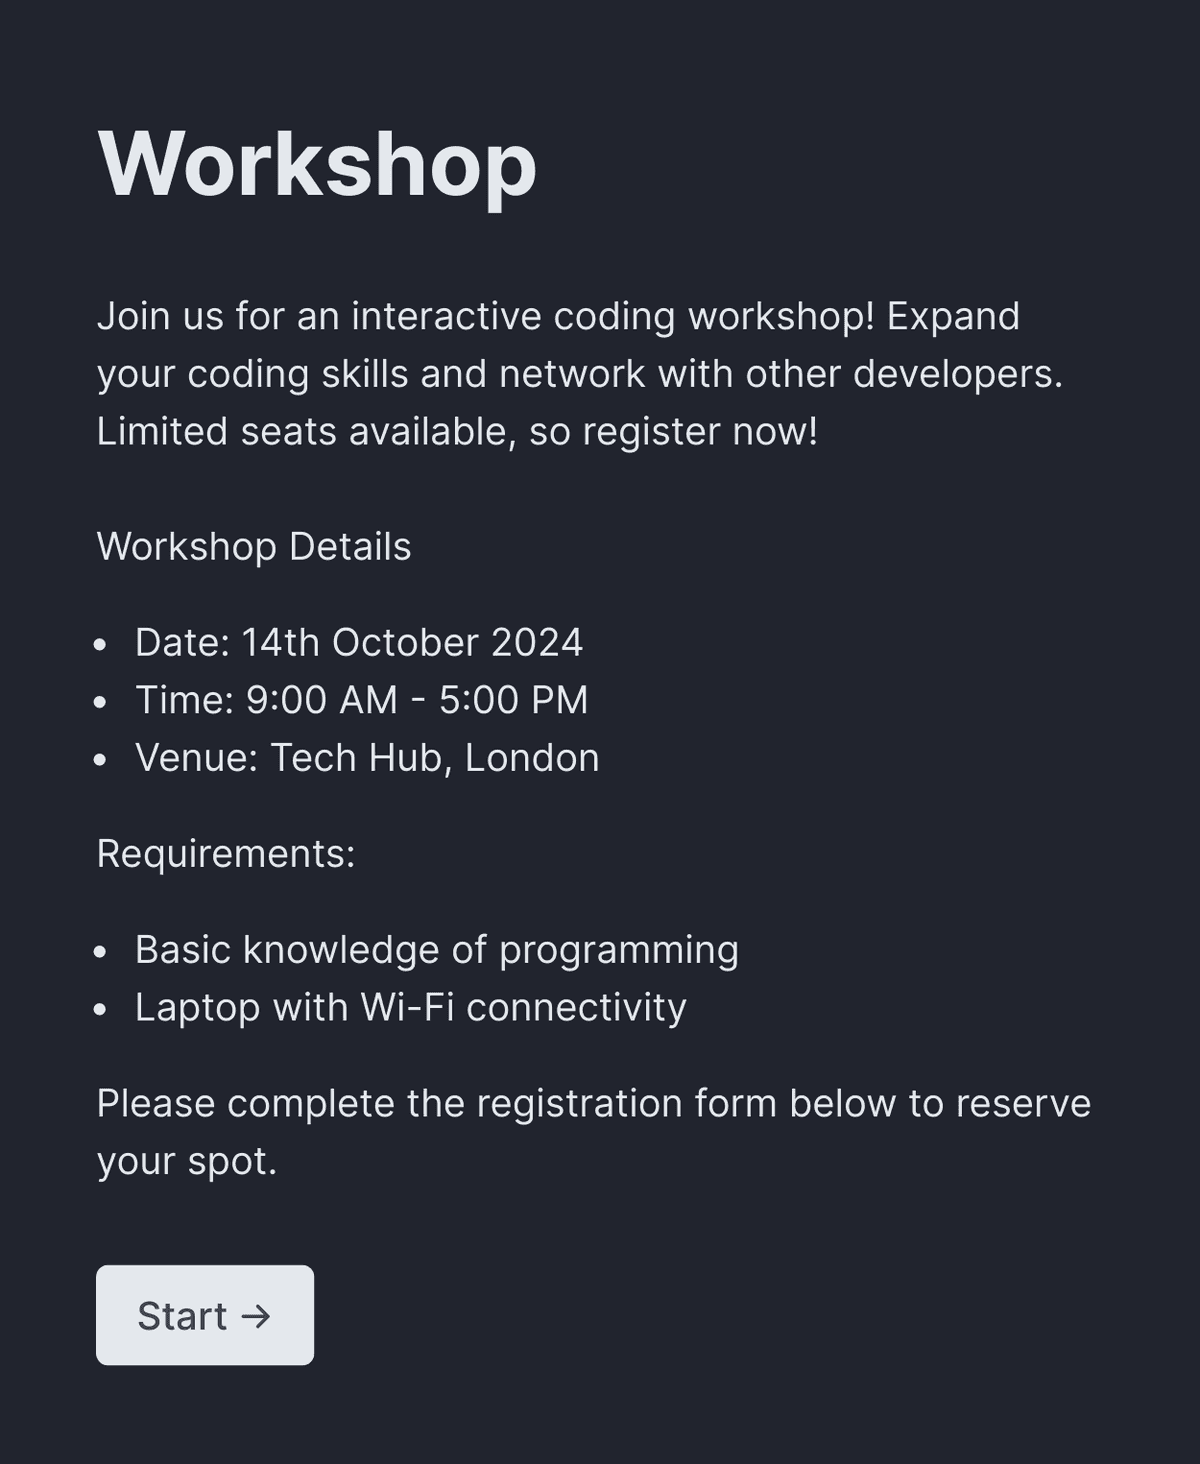 Welcome page that lists the workshop's date, time, venue, and other requirements, and includes a 'Start' button to begin registration